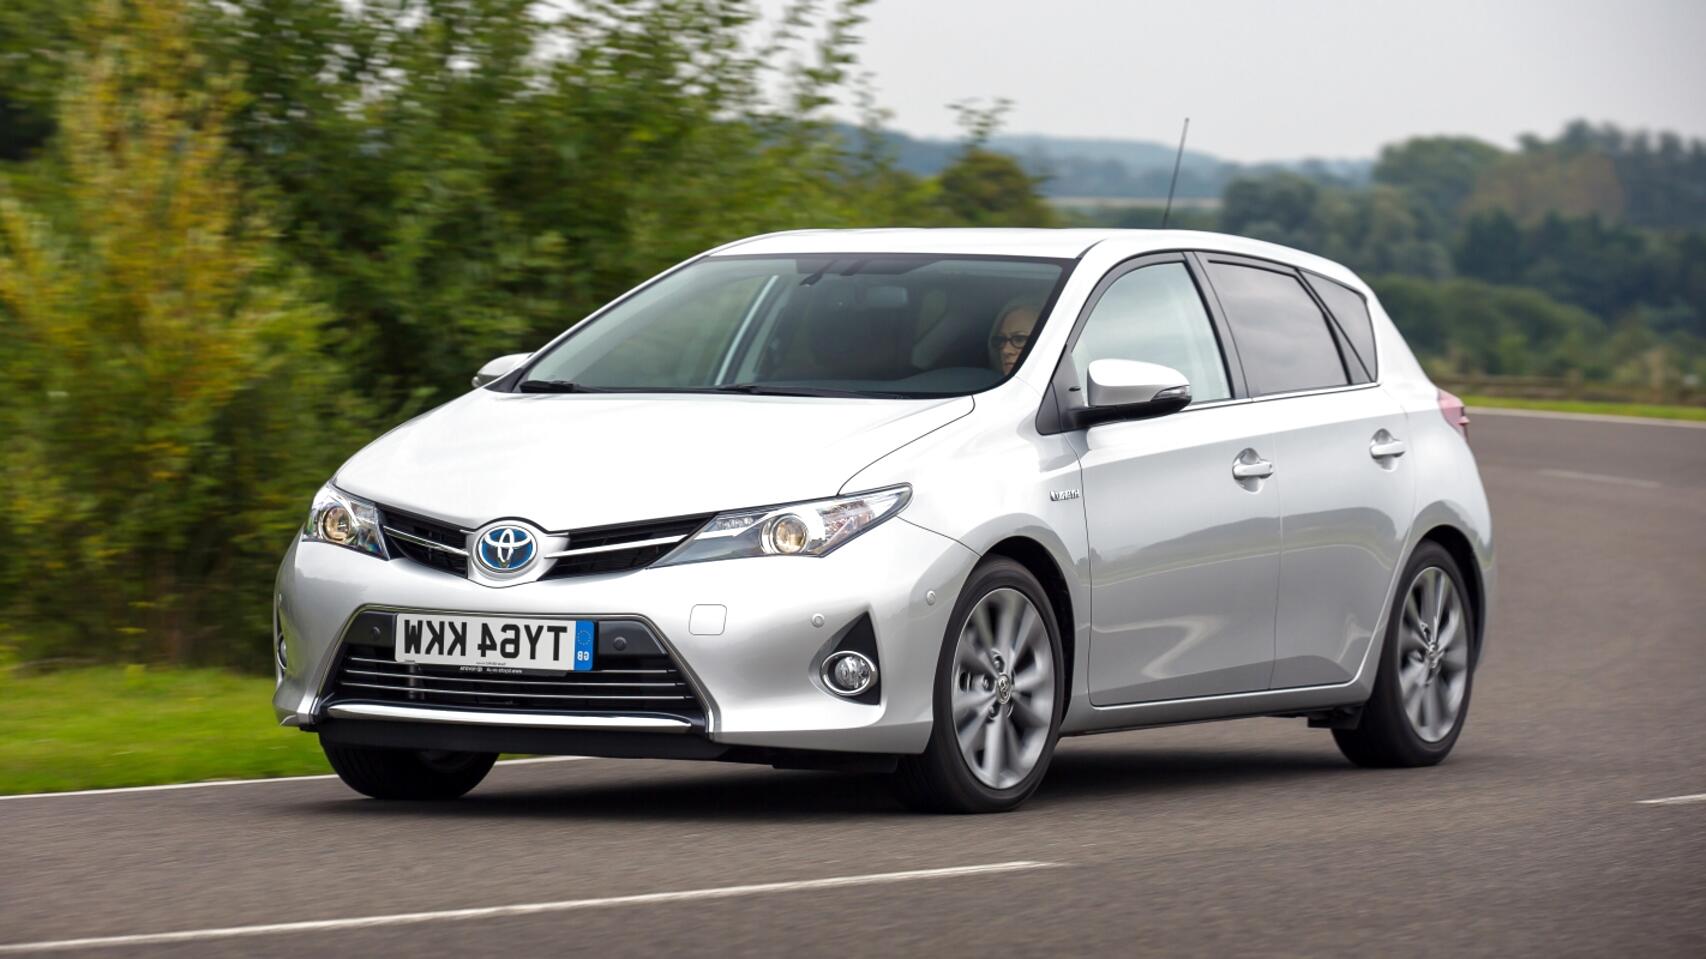 Toyota Auris 2013 for sale in UK View 61 bargains